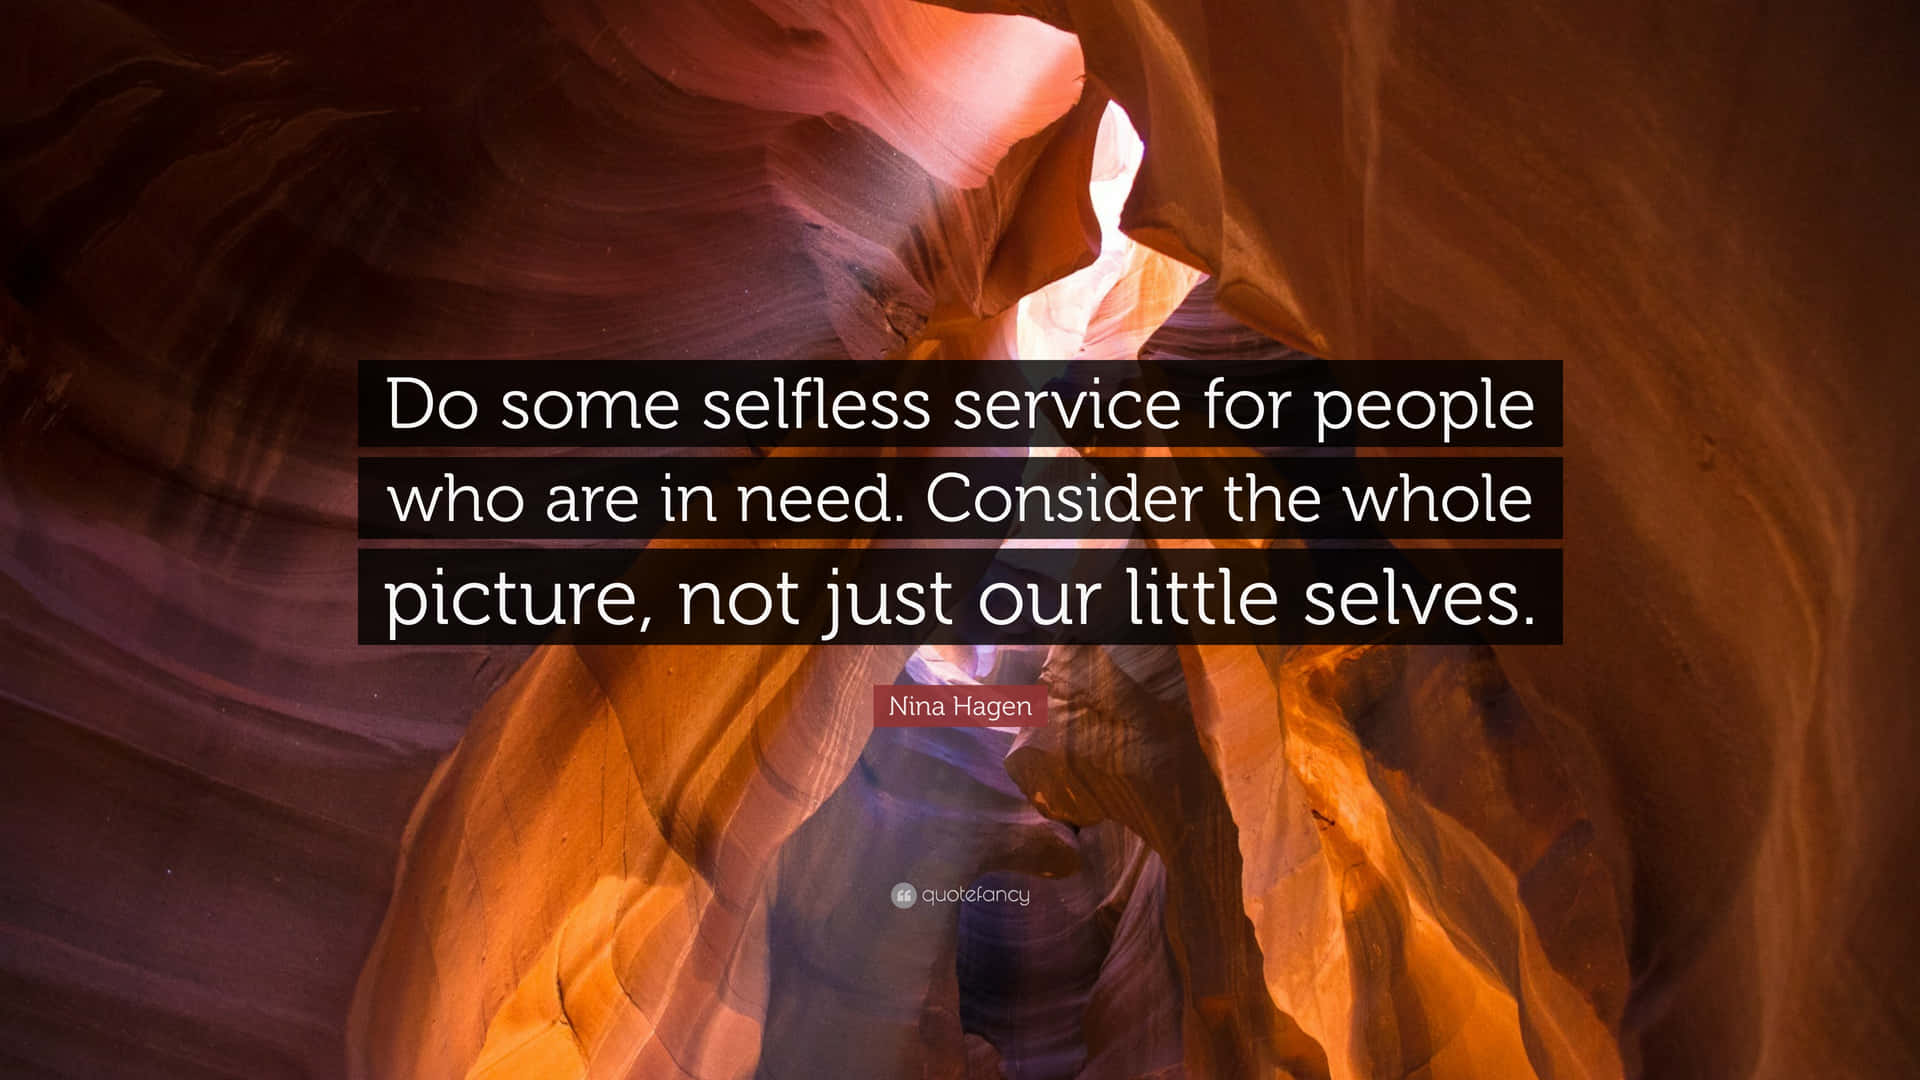 Selfless Service Quote Wallpaper